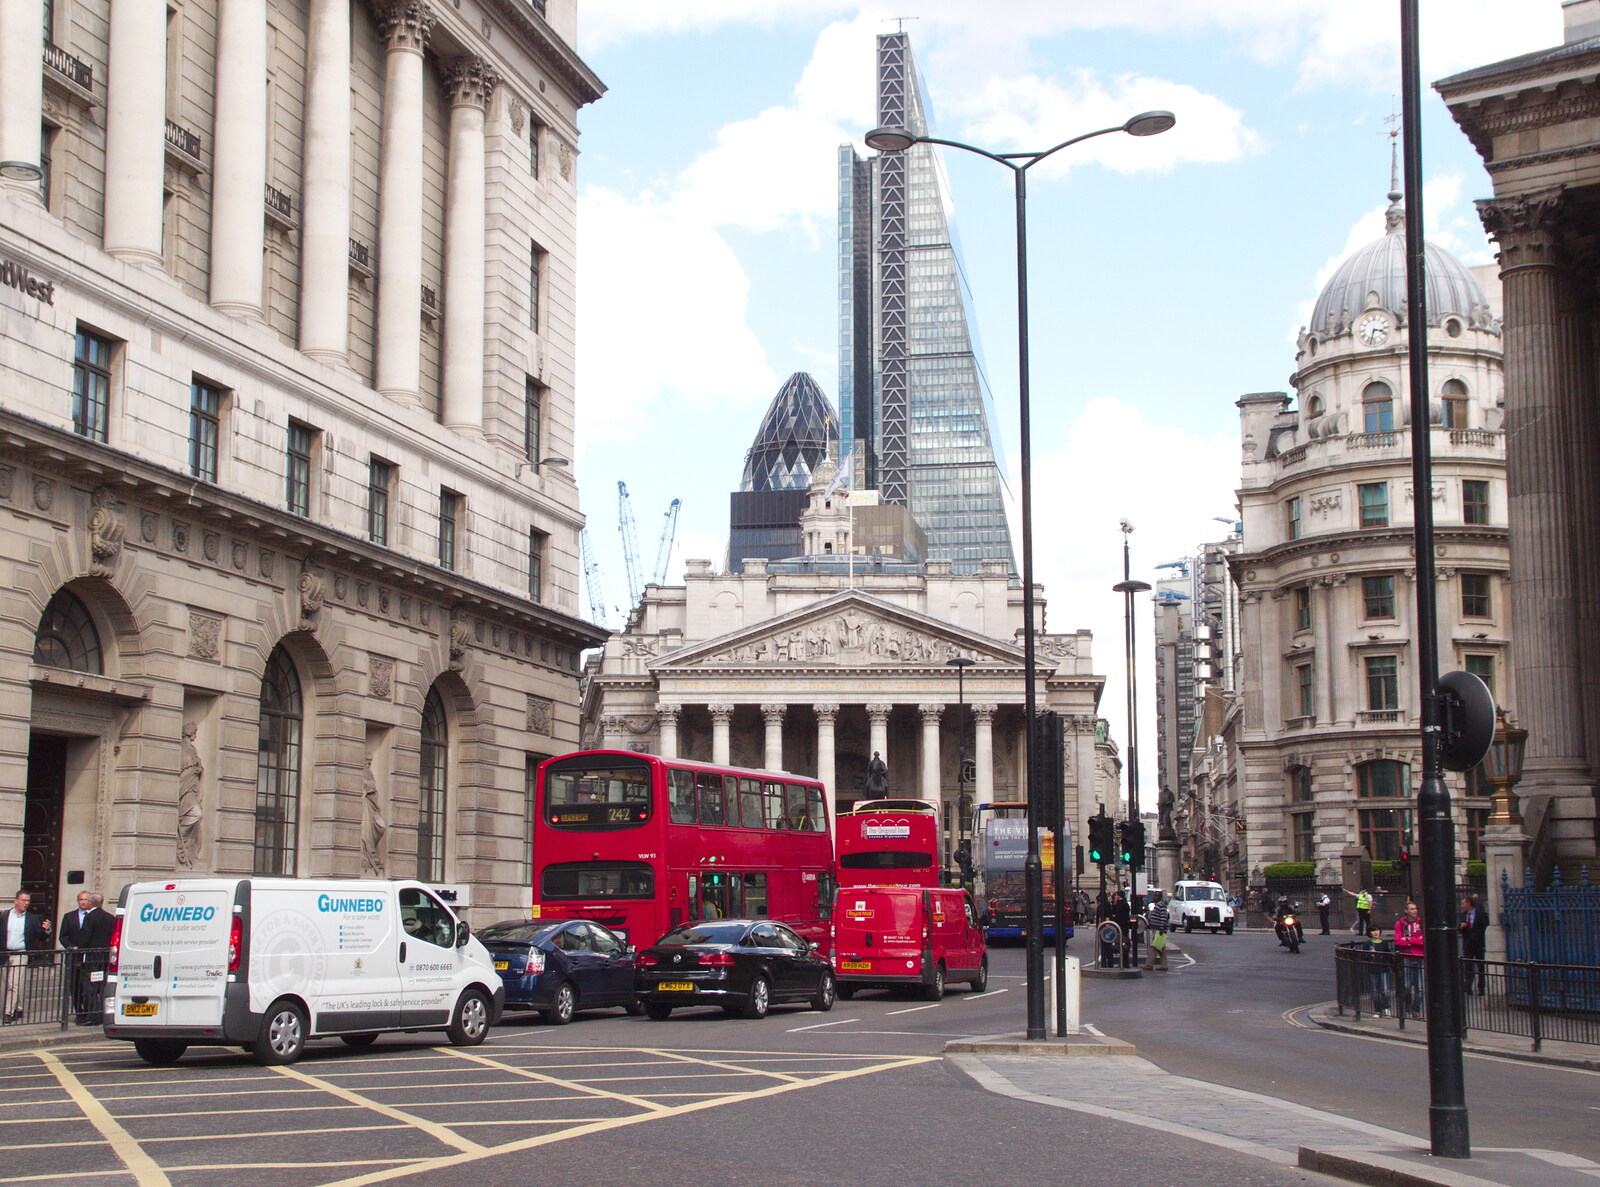 The Cheese Grater and Royal Exchange from A May Miscellany, London - 8th May 2014